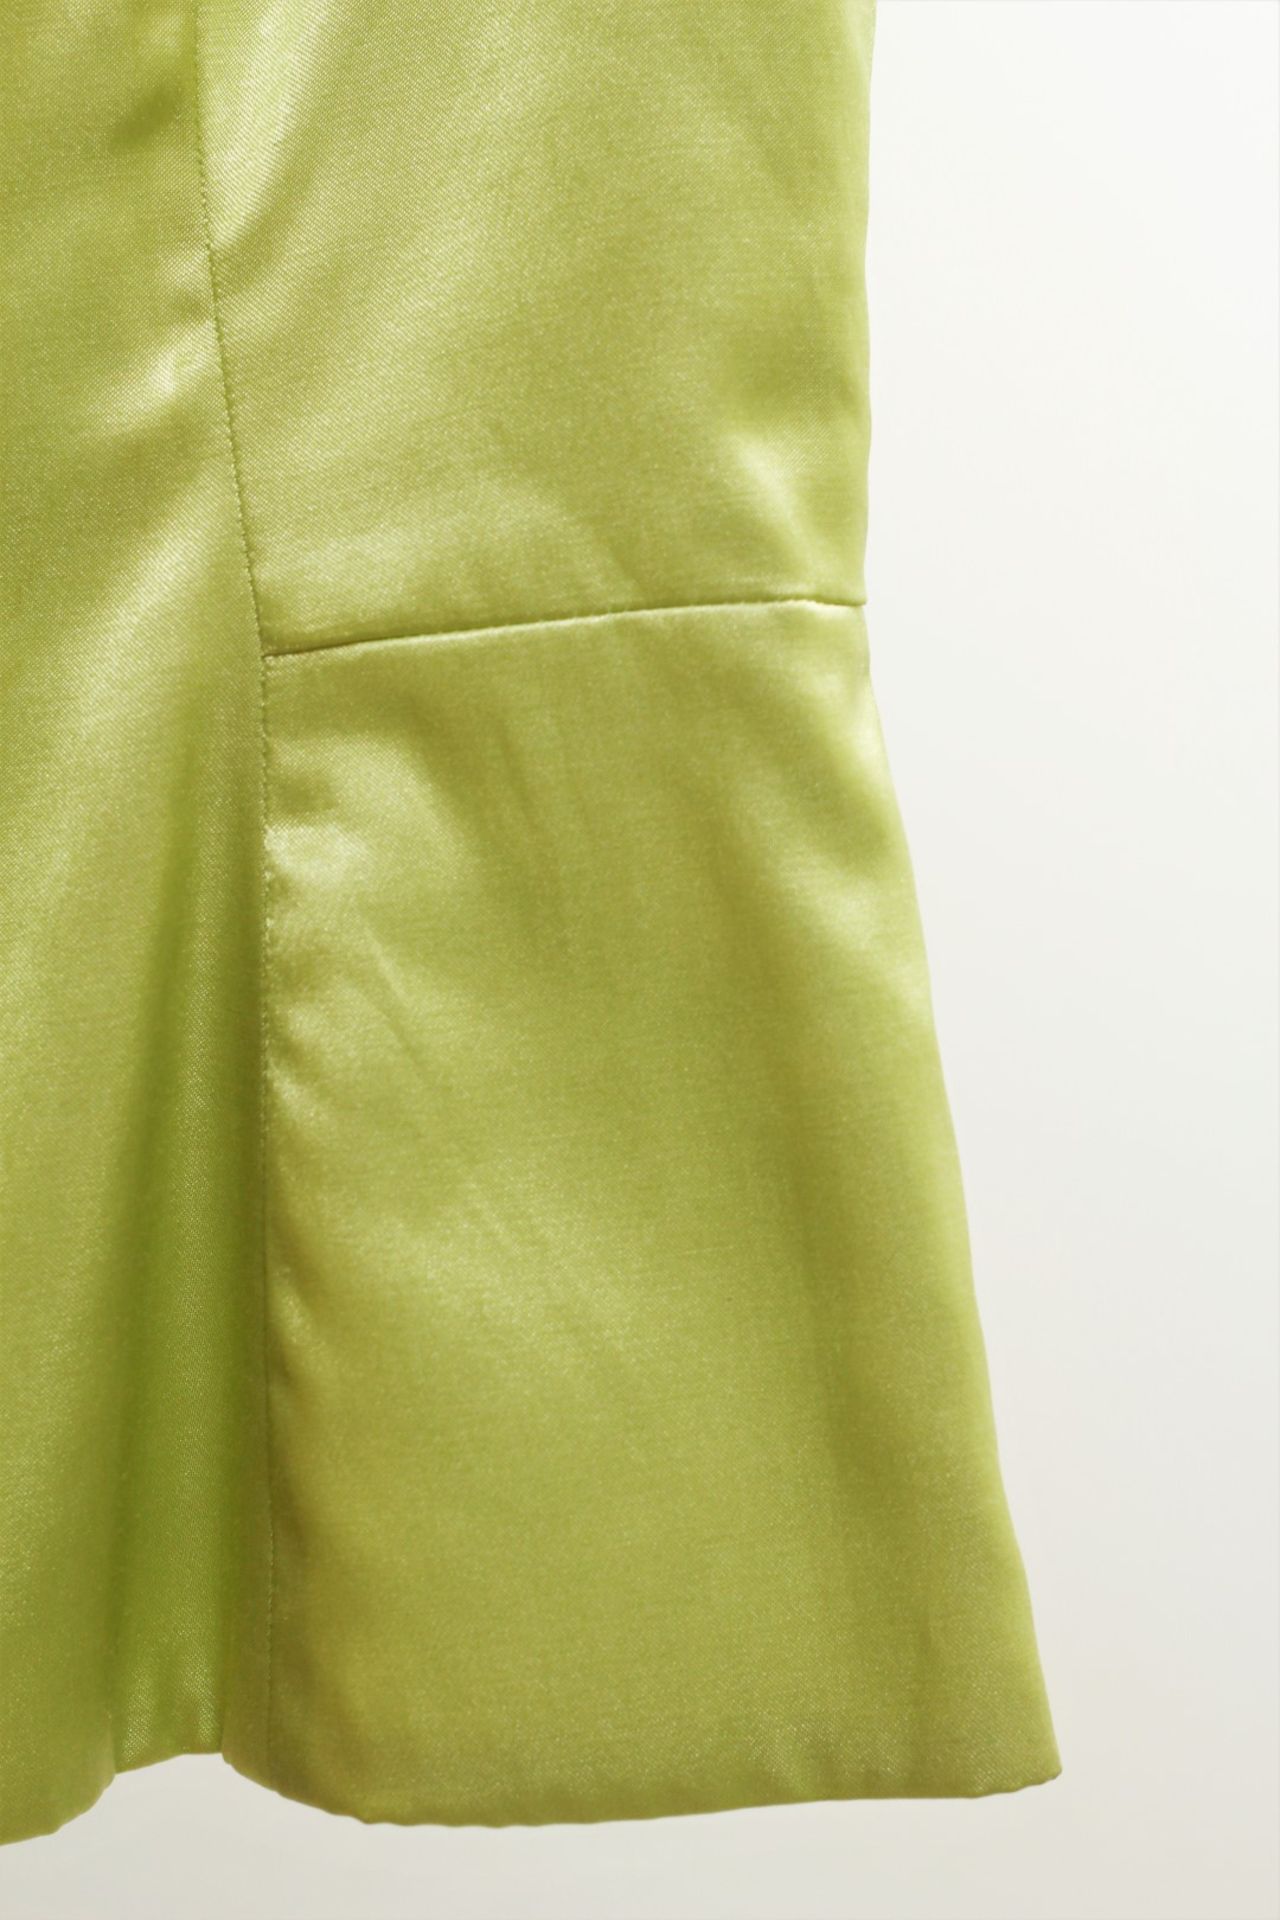 1 x Boutique Le Duc Lime Green Vest - From a High End Clothing Boutique In The - Image 4 of 9